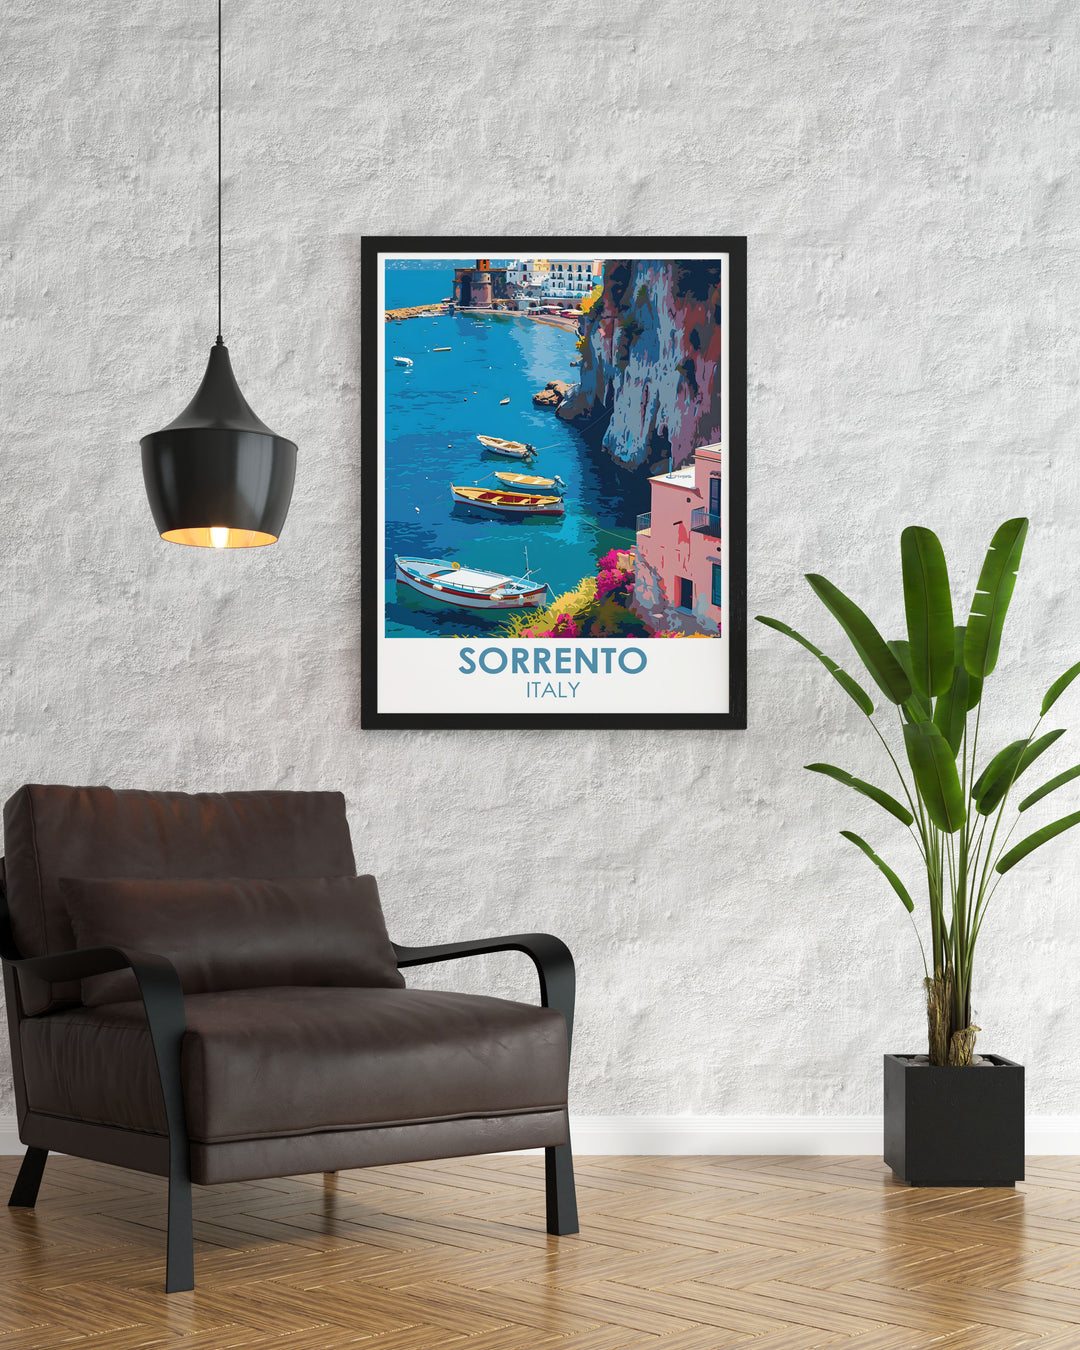 Marina Grande prints capturing the vibrant atmosphere of Sorrento Italy with detailed artwork of Marina Grande mountain and colorful boats. Perfect as a thoughtful gift for travel enthusiasts this Italy travel print adds a touch of sophistication to any decor.